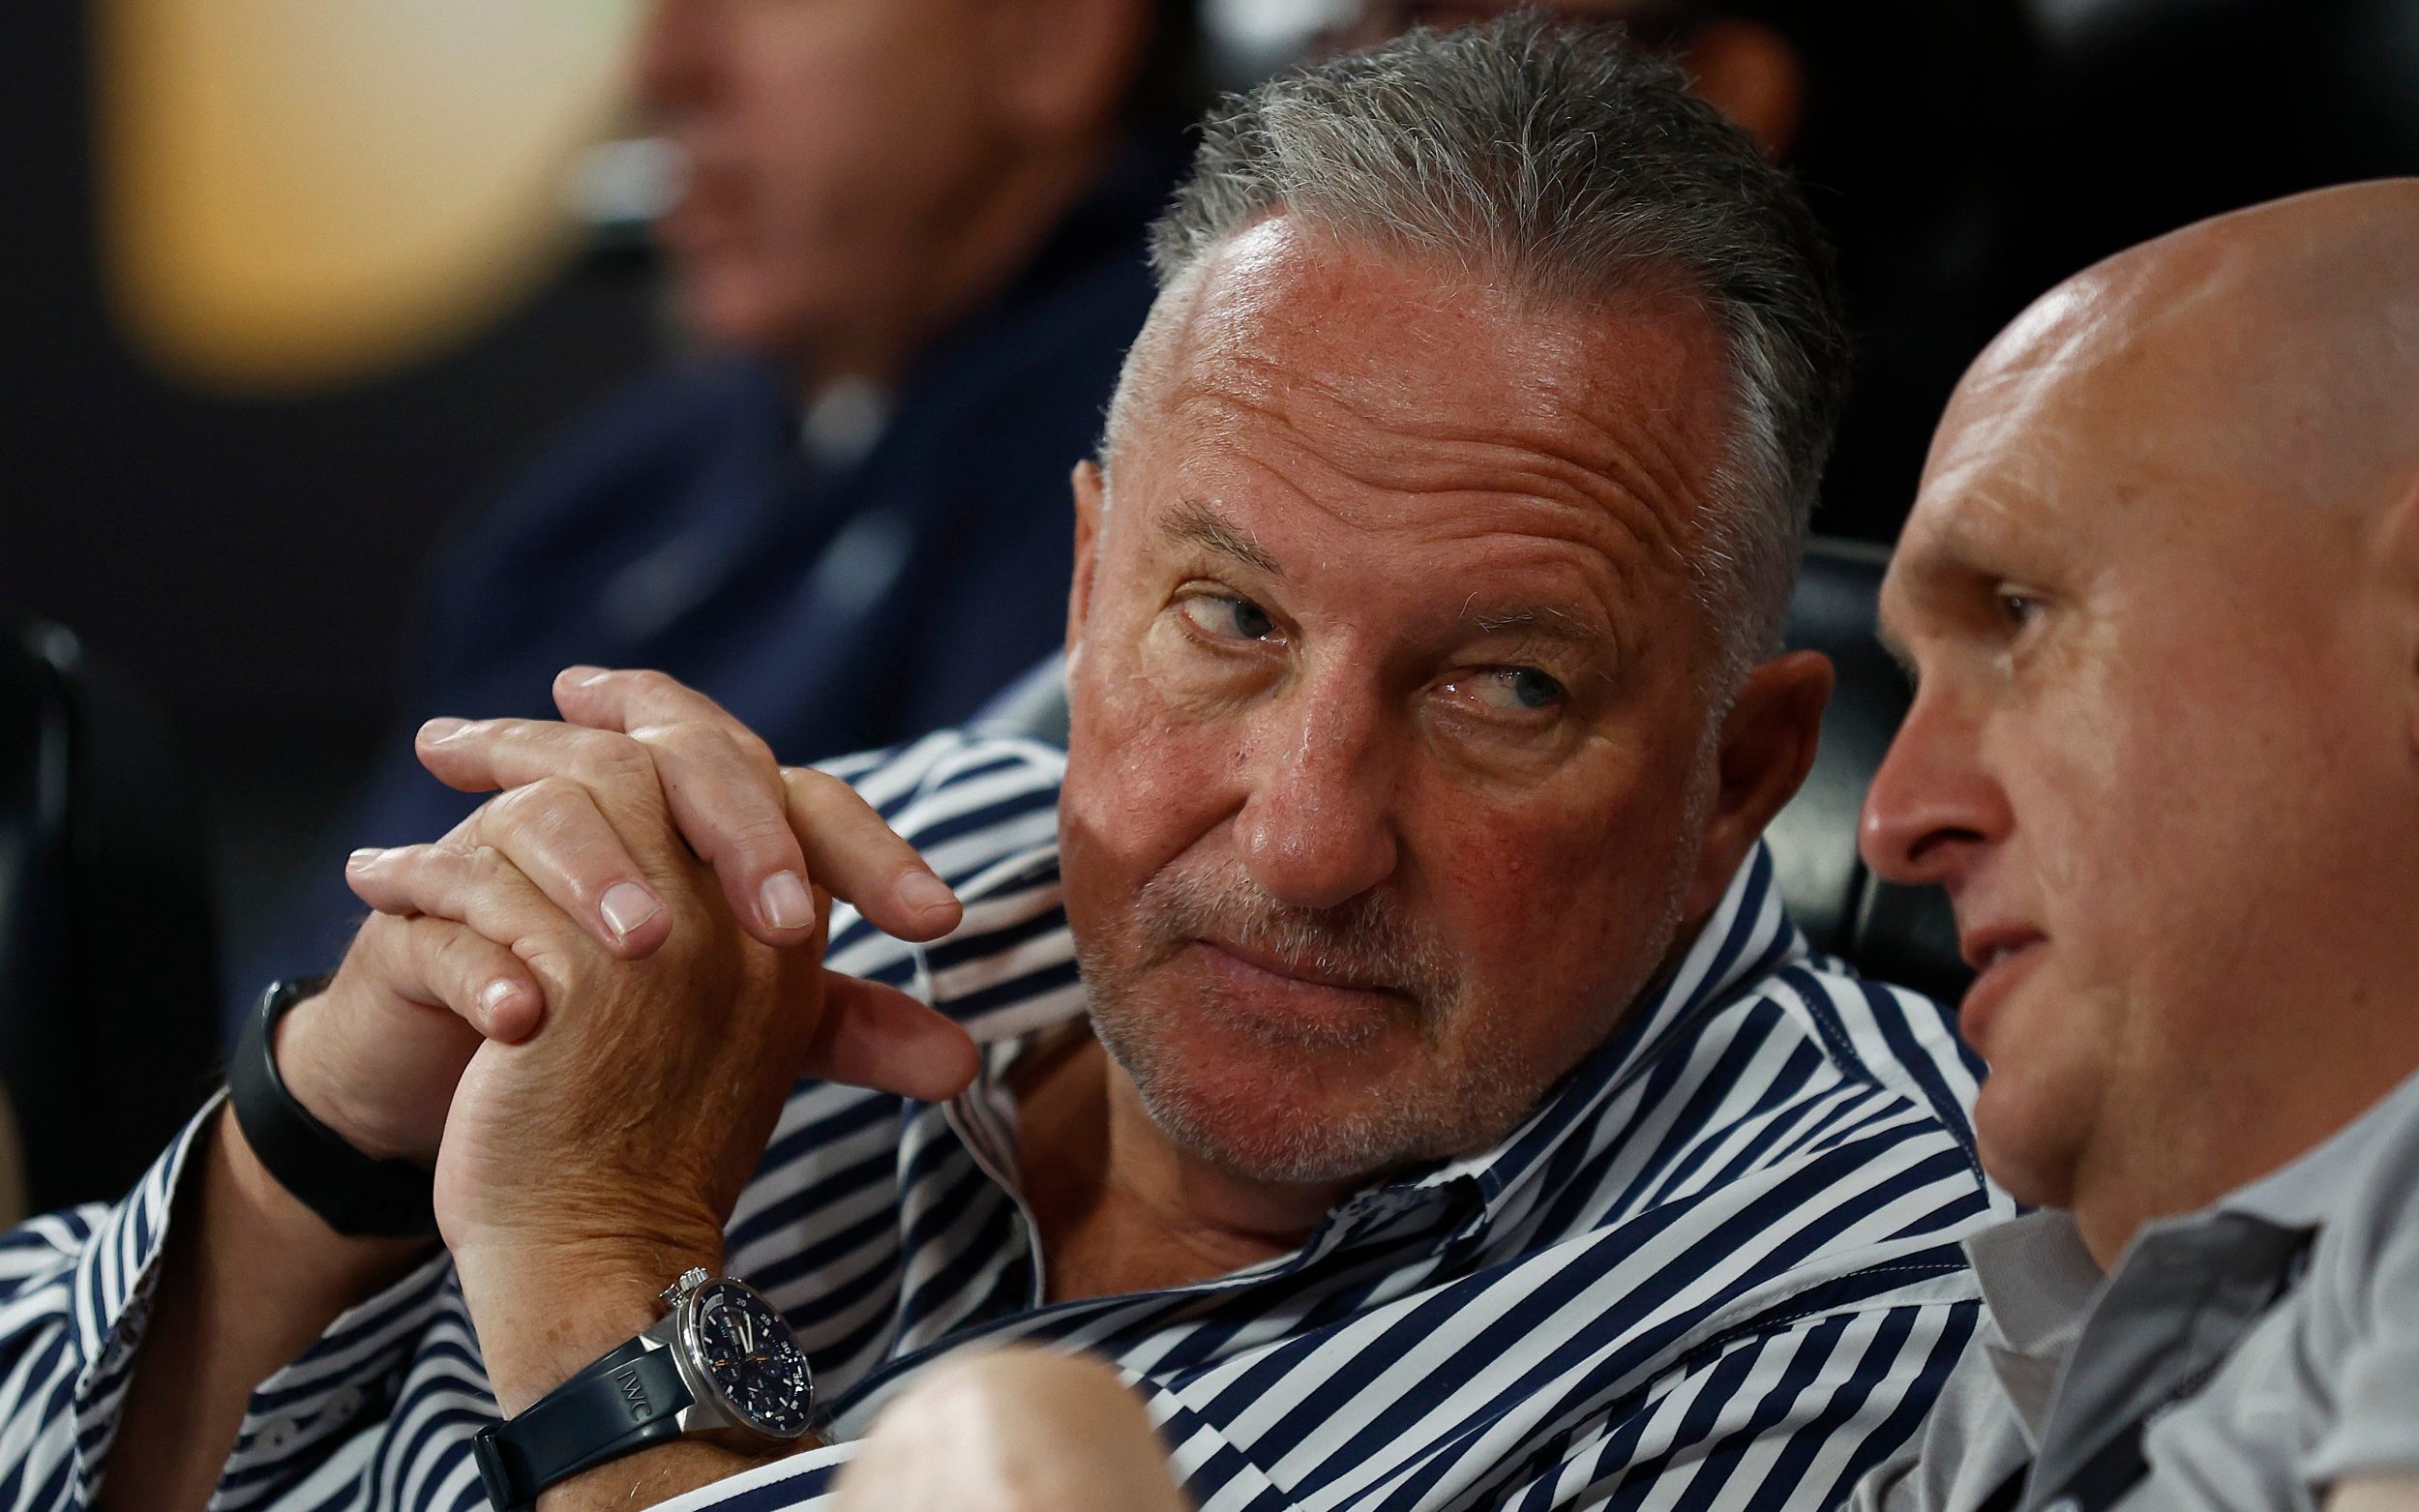 barrage of cheap shots unleashed on lord botham at dcms hearing a disgrace